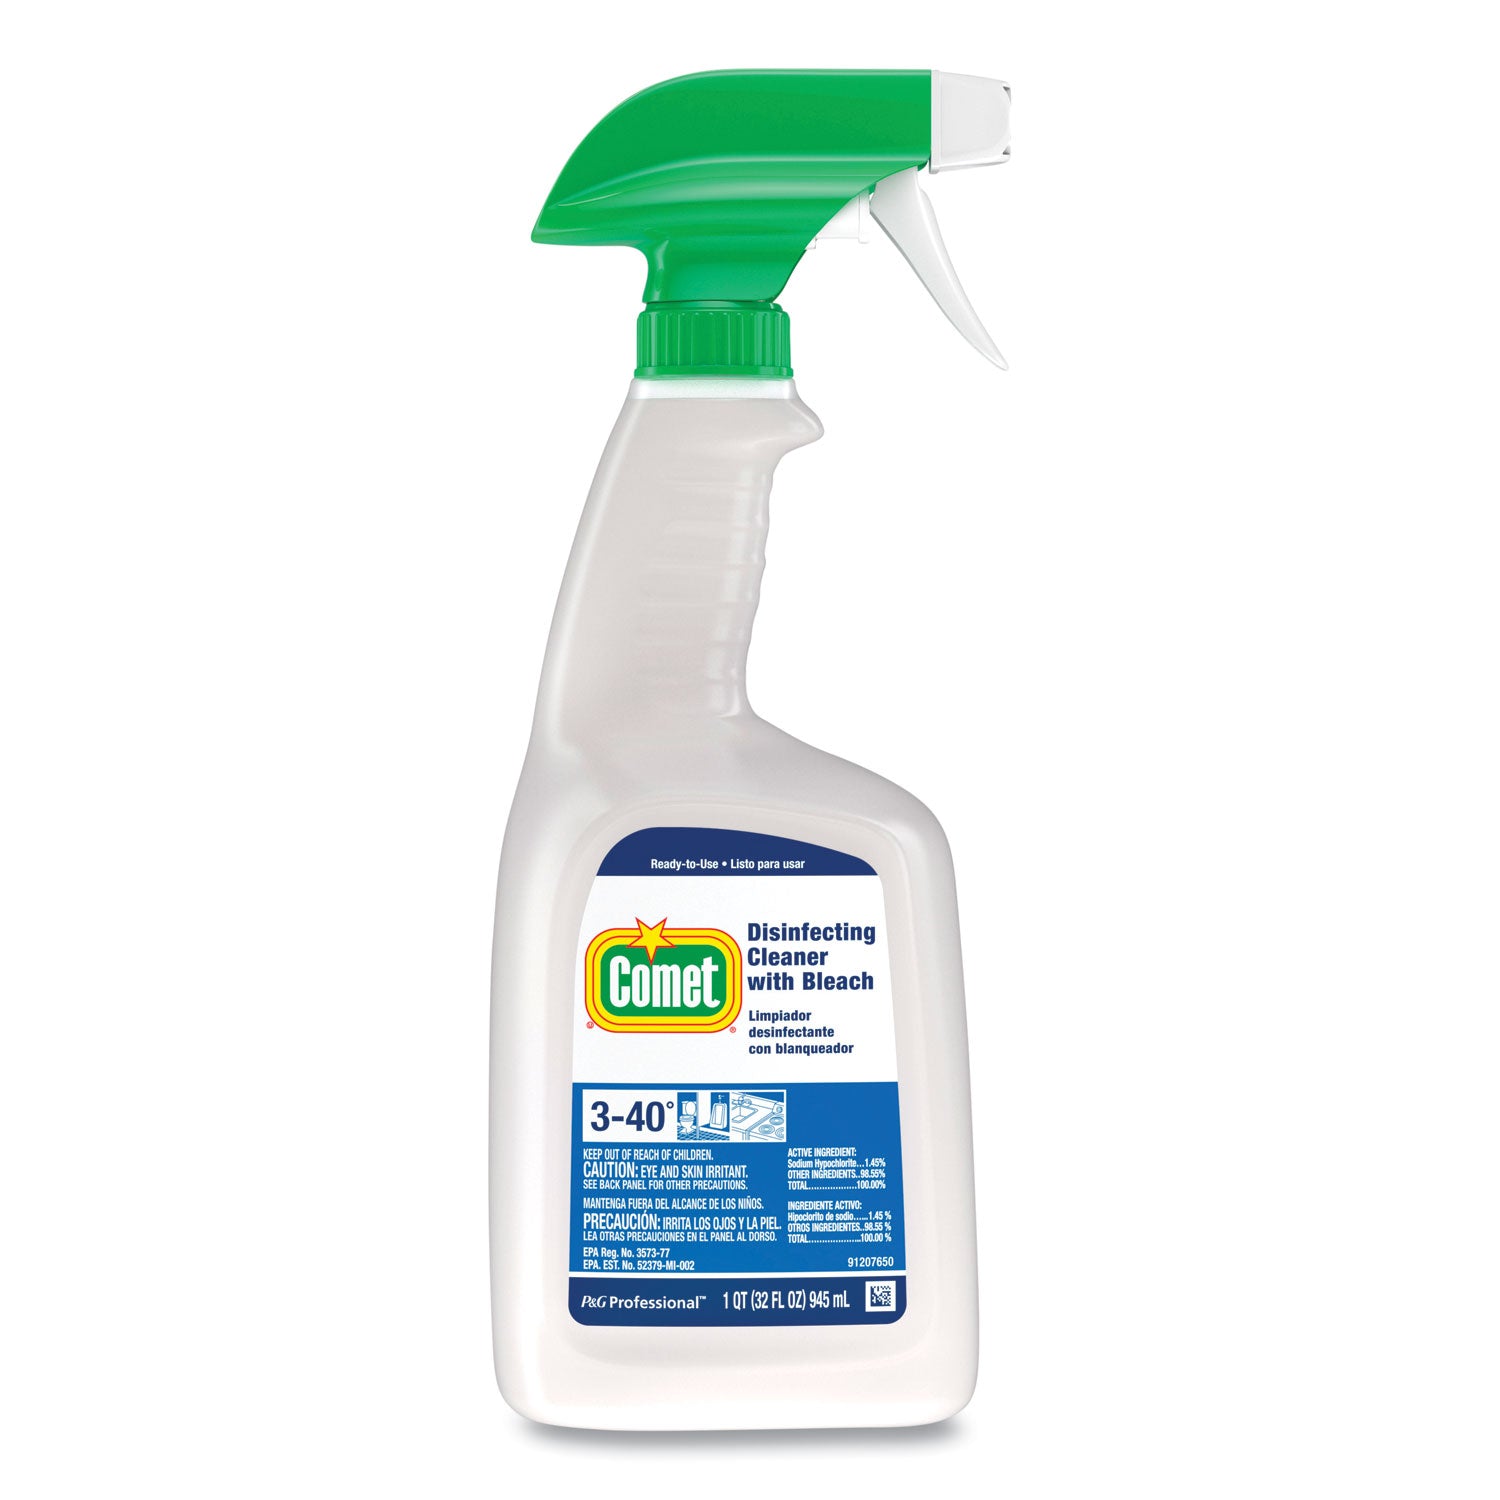 disinfecting-cleaner-with-bleach-32-oz-plastic-spray-bottle-fresh-scent-8-carton_pgc30314ct - 2